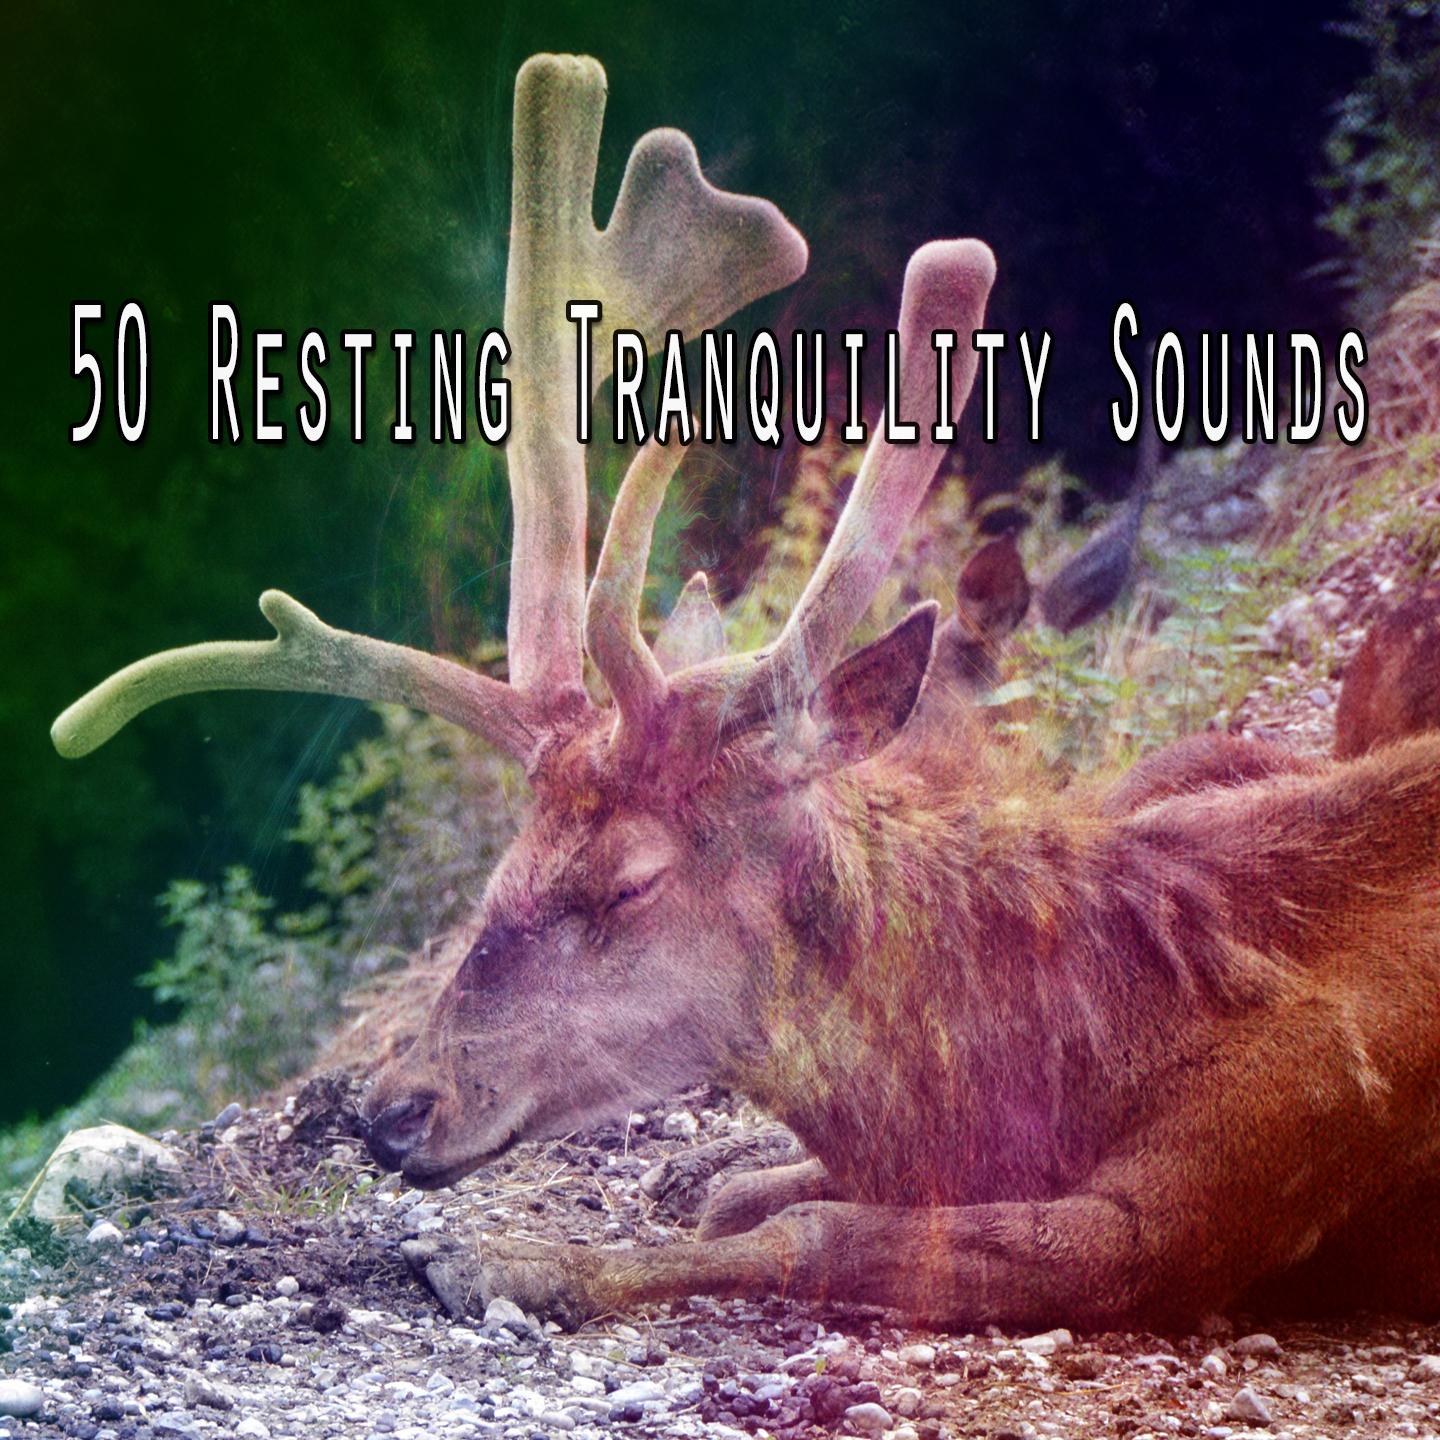 50 Resting Tranquility Sounds